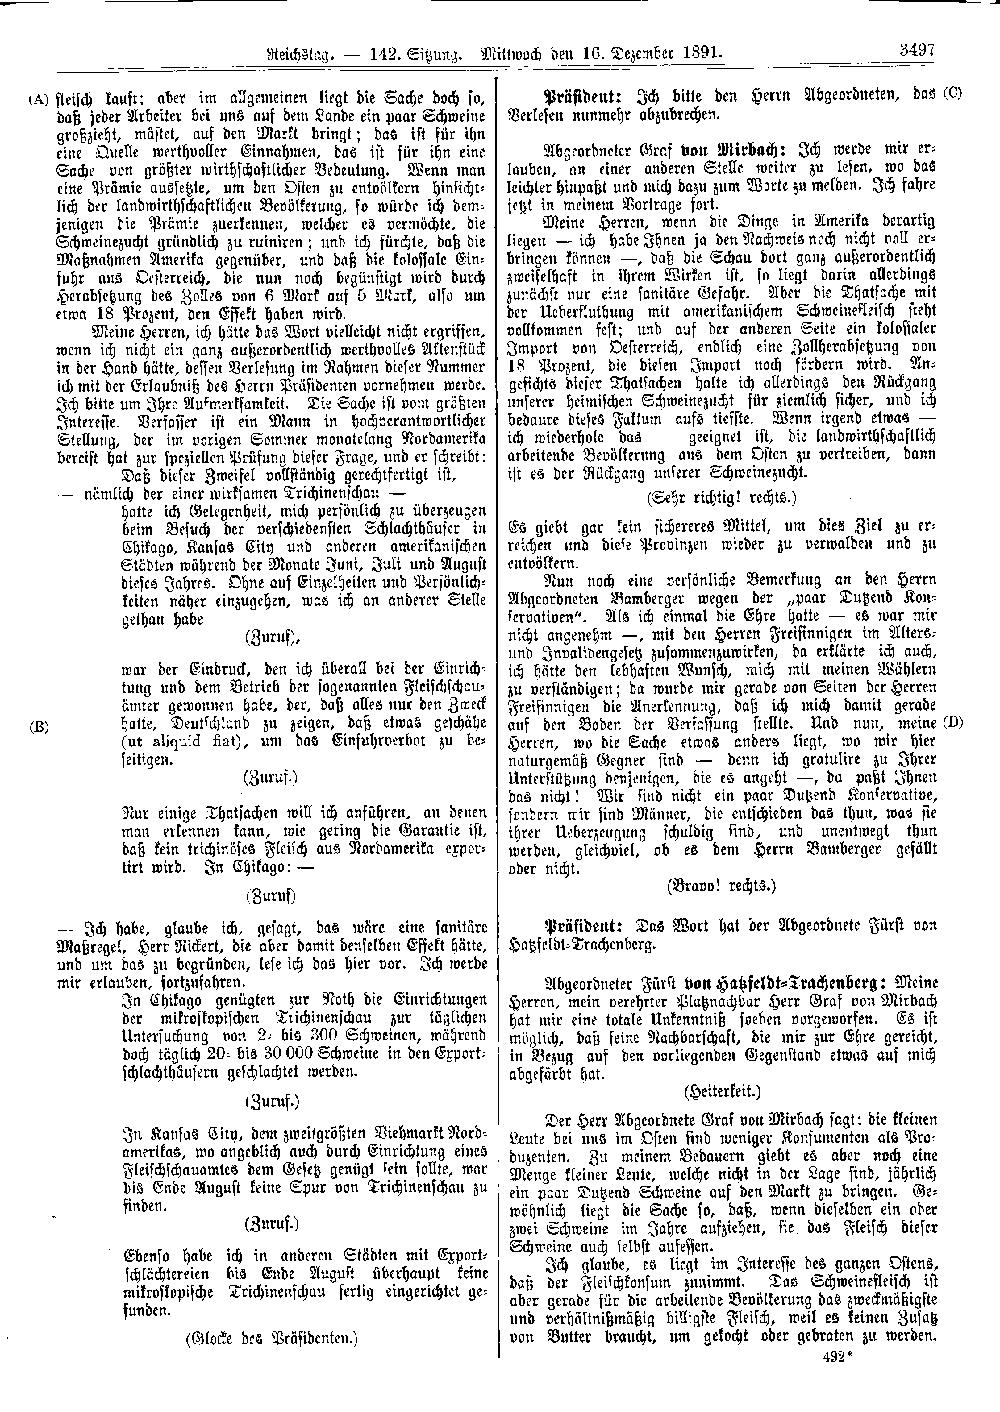 Scan of page 3497